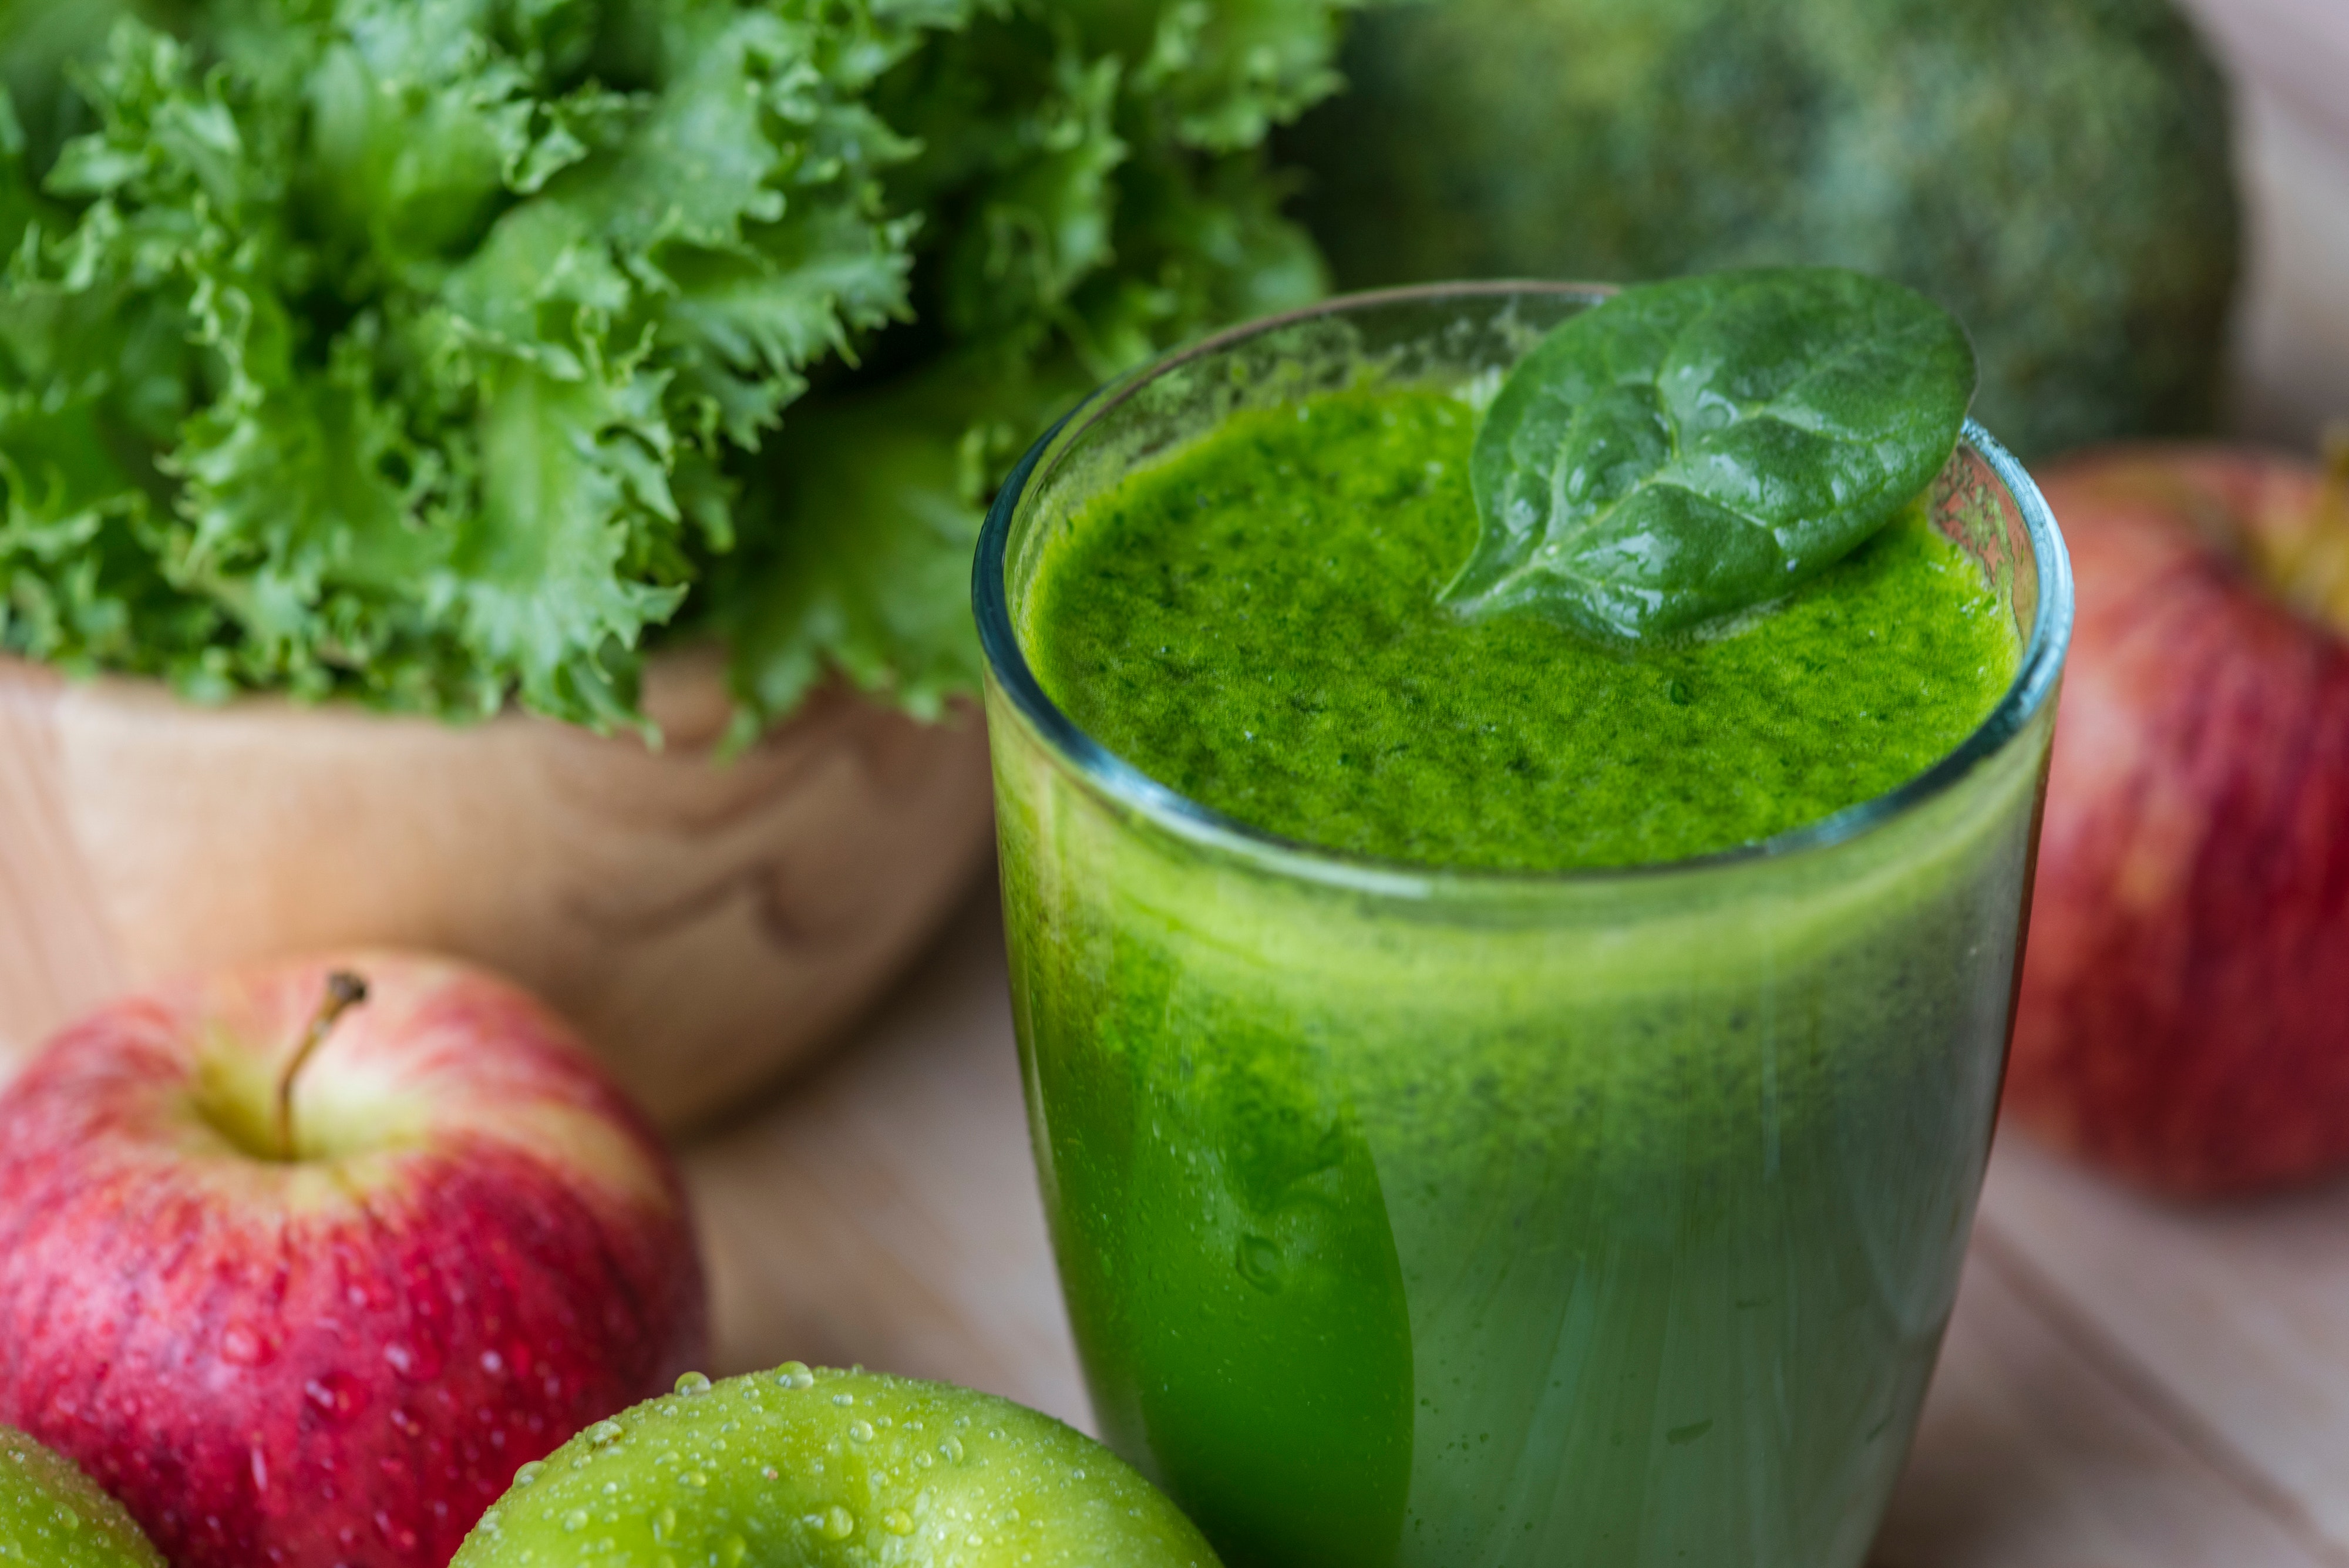 A Healthy Lifestyle Through Juicing